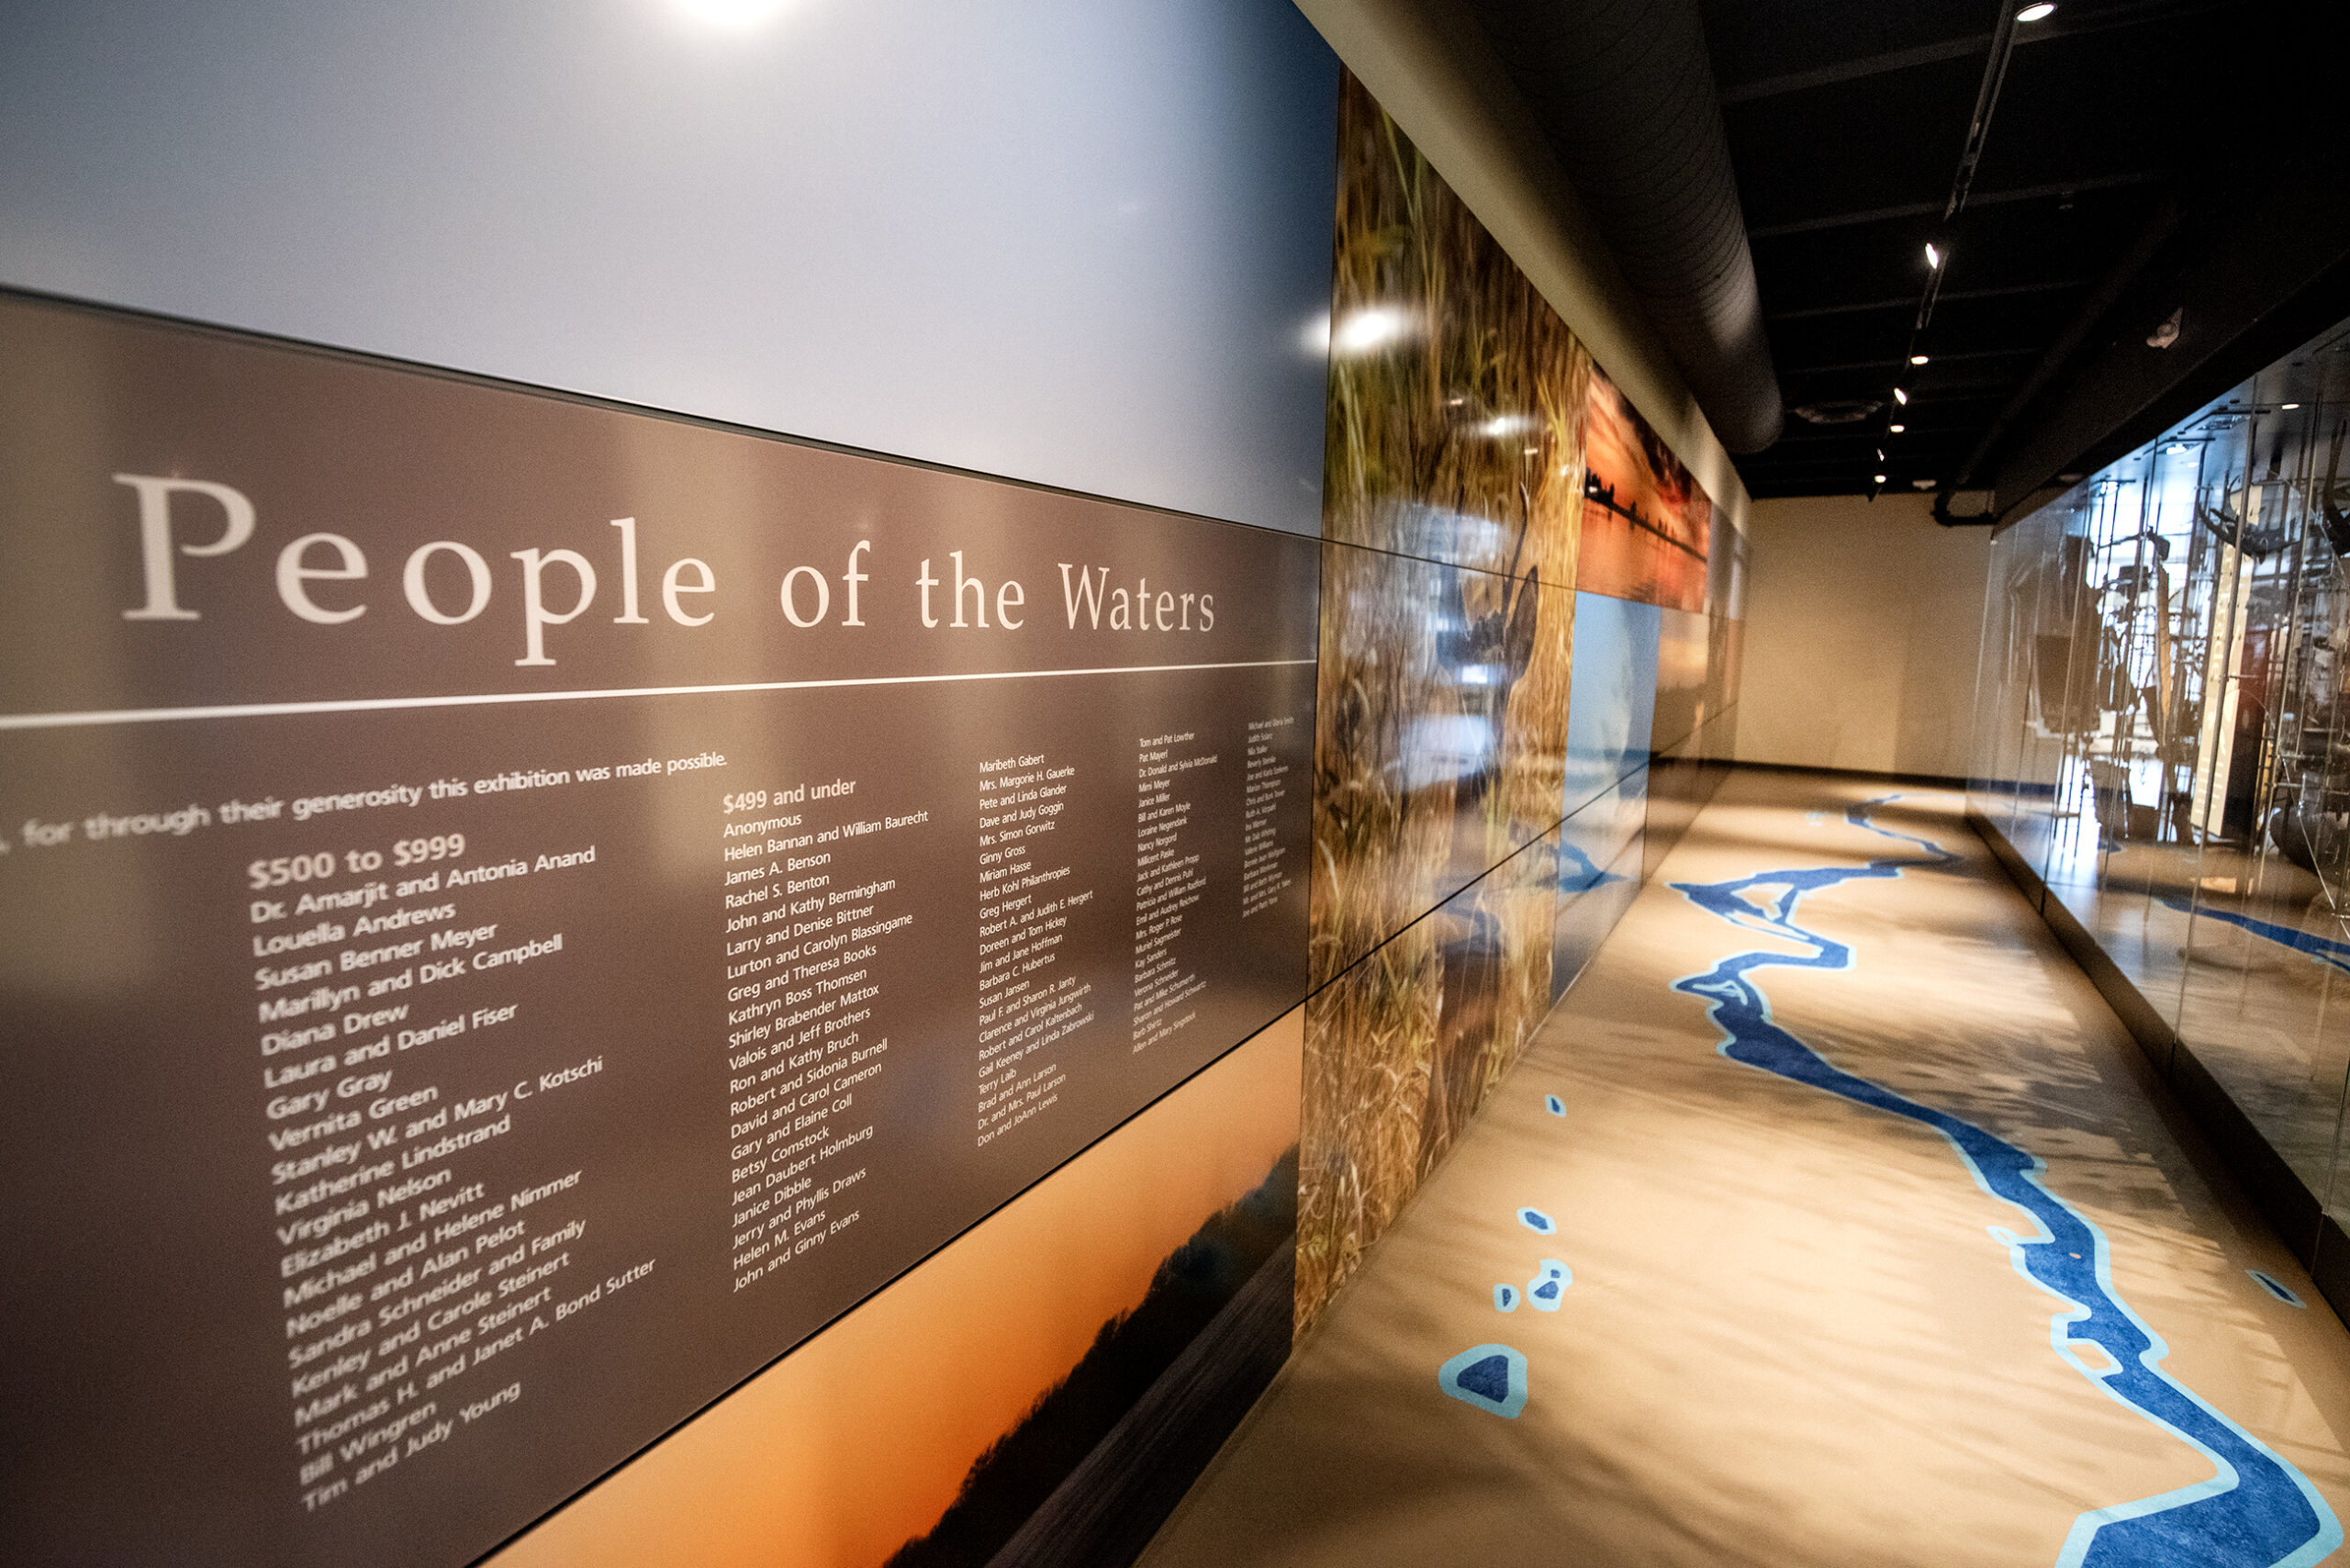 A display says "People of the Water" on the wall. The floor is patterned like a river.